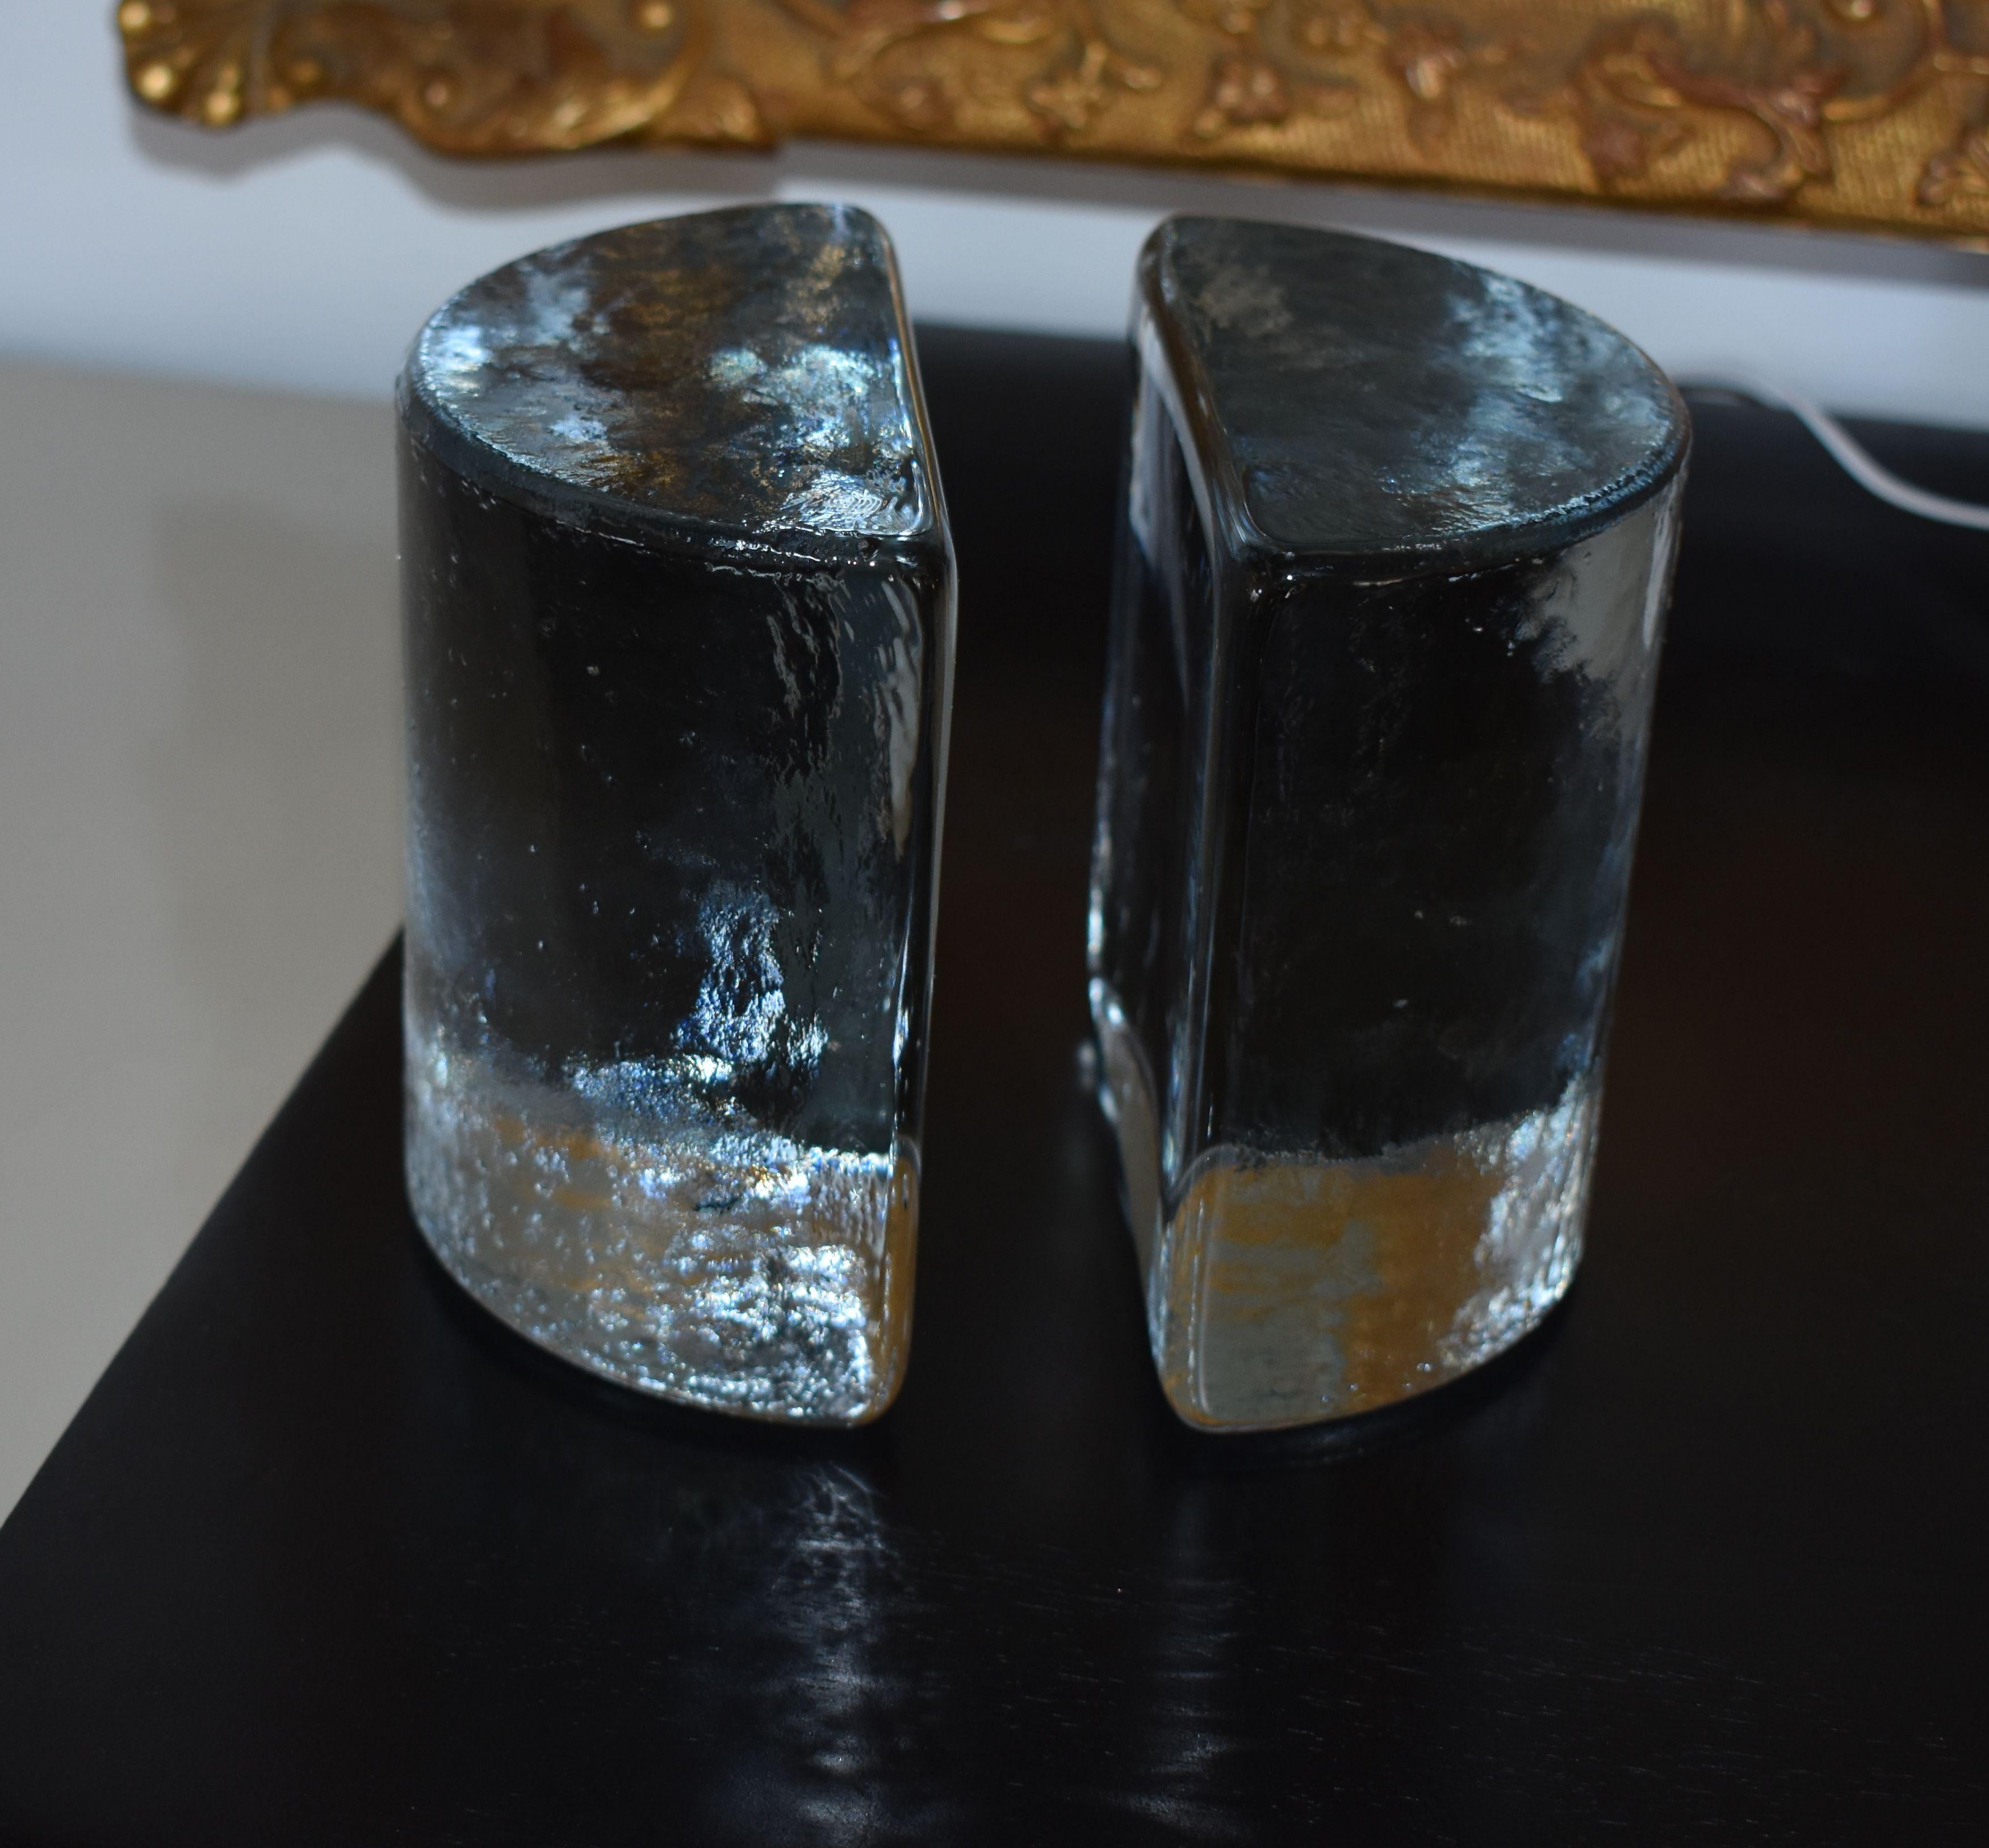 Pair of glass handmade bookends made by Blenko. Each one look like a chunky half circle block of ice.

Blenko sticker bookend.